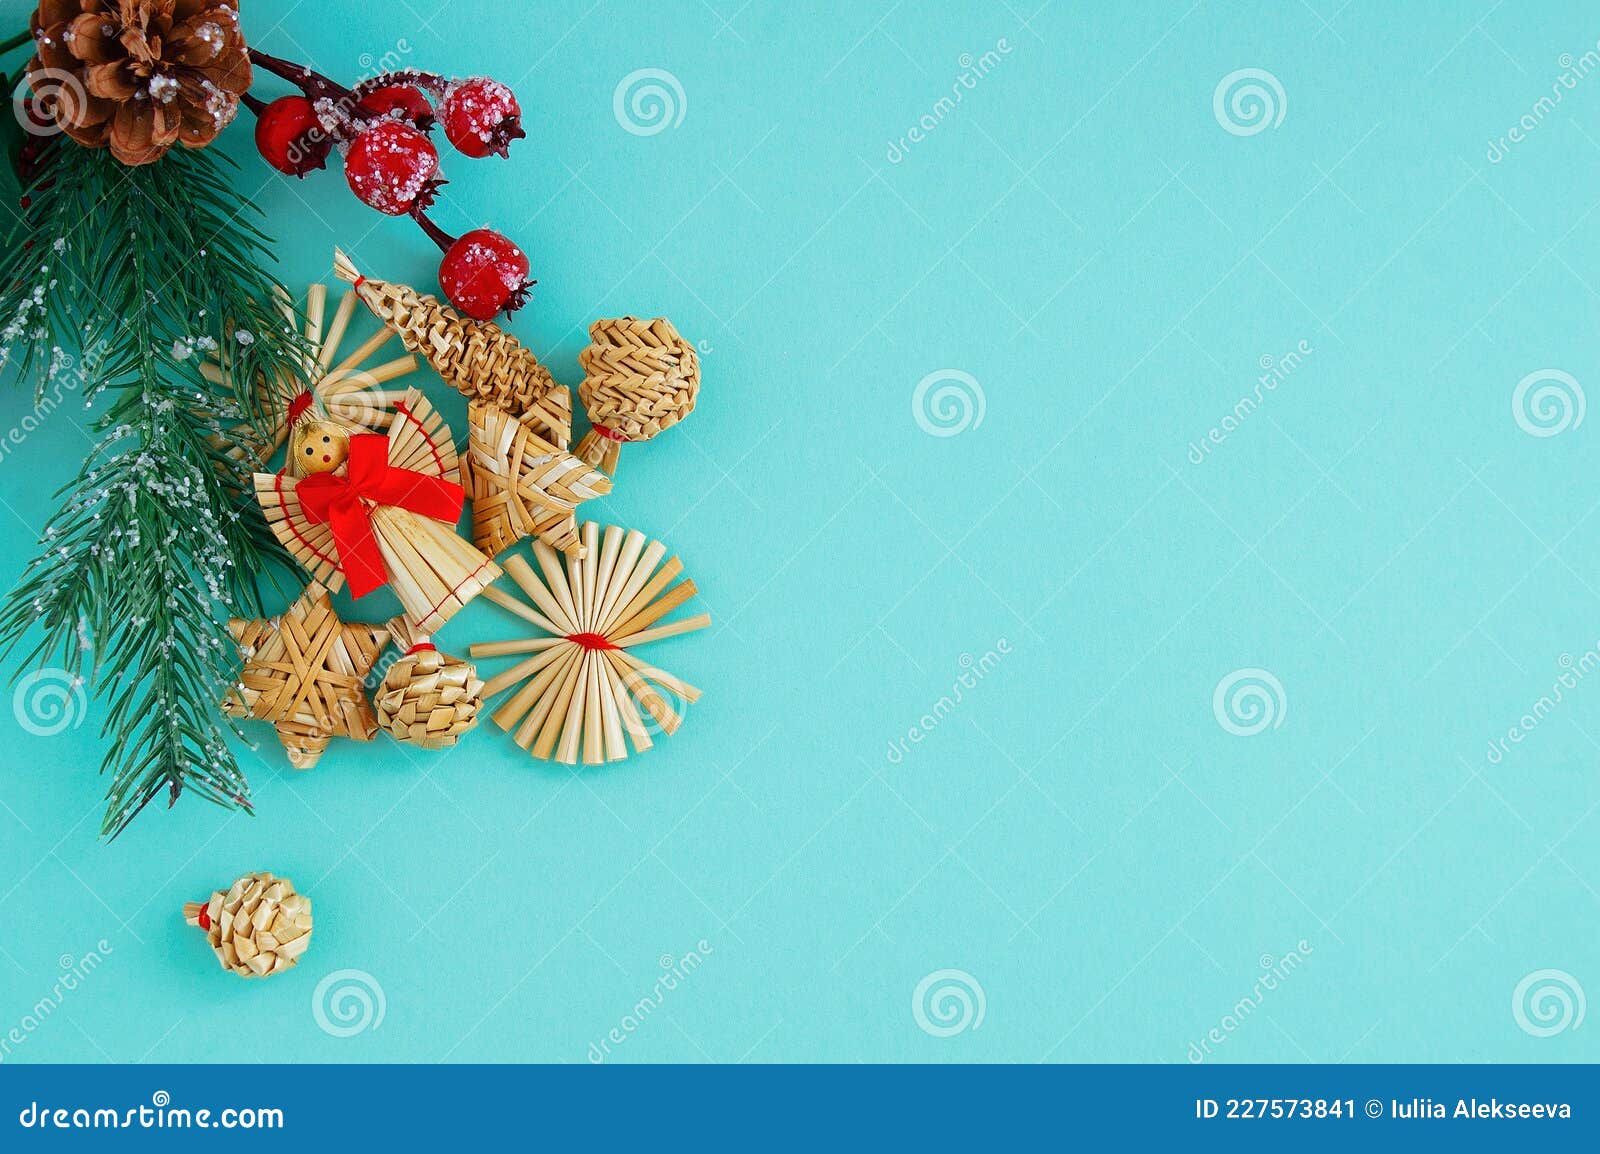 https://thumbs.dreamstime.com/z/christmas-straw-angel-red-bow-decorations-branch-tree-turquoise-background-227573841.jpg